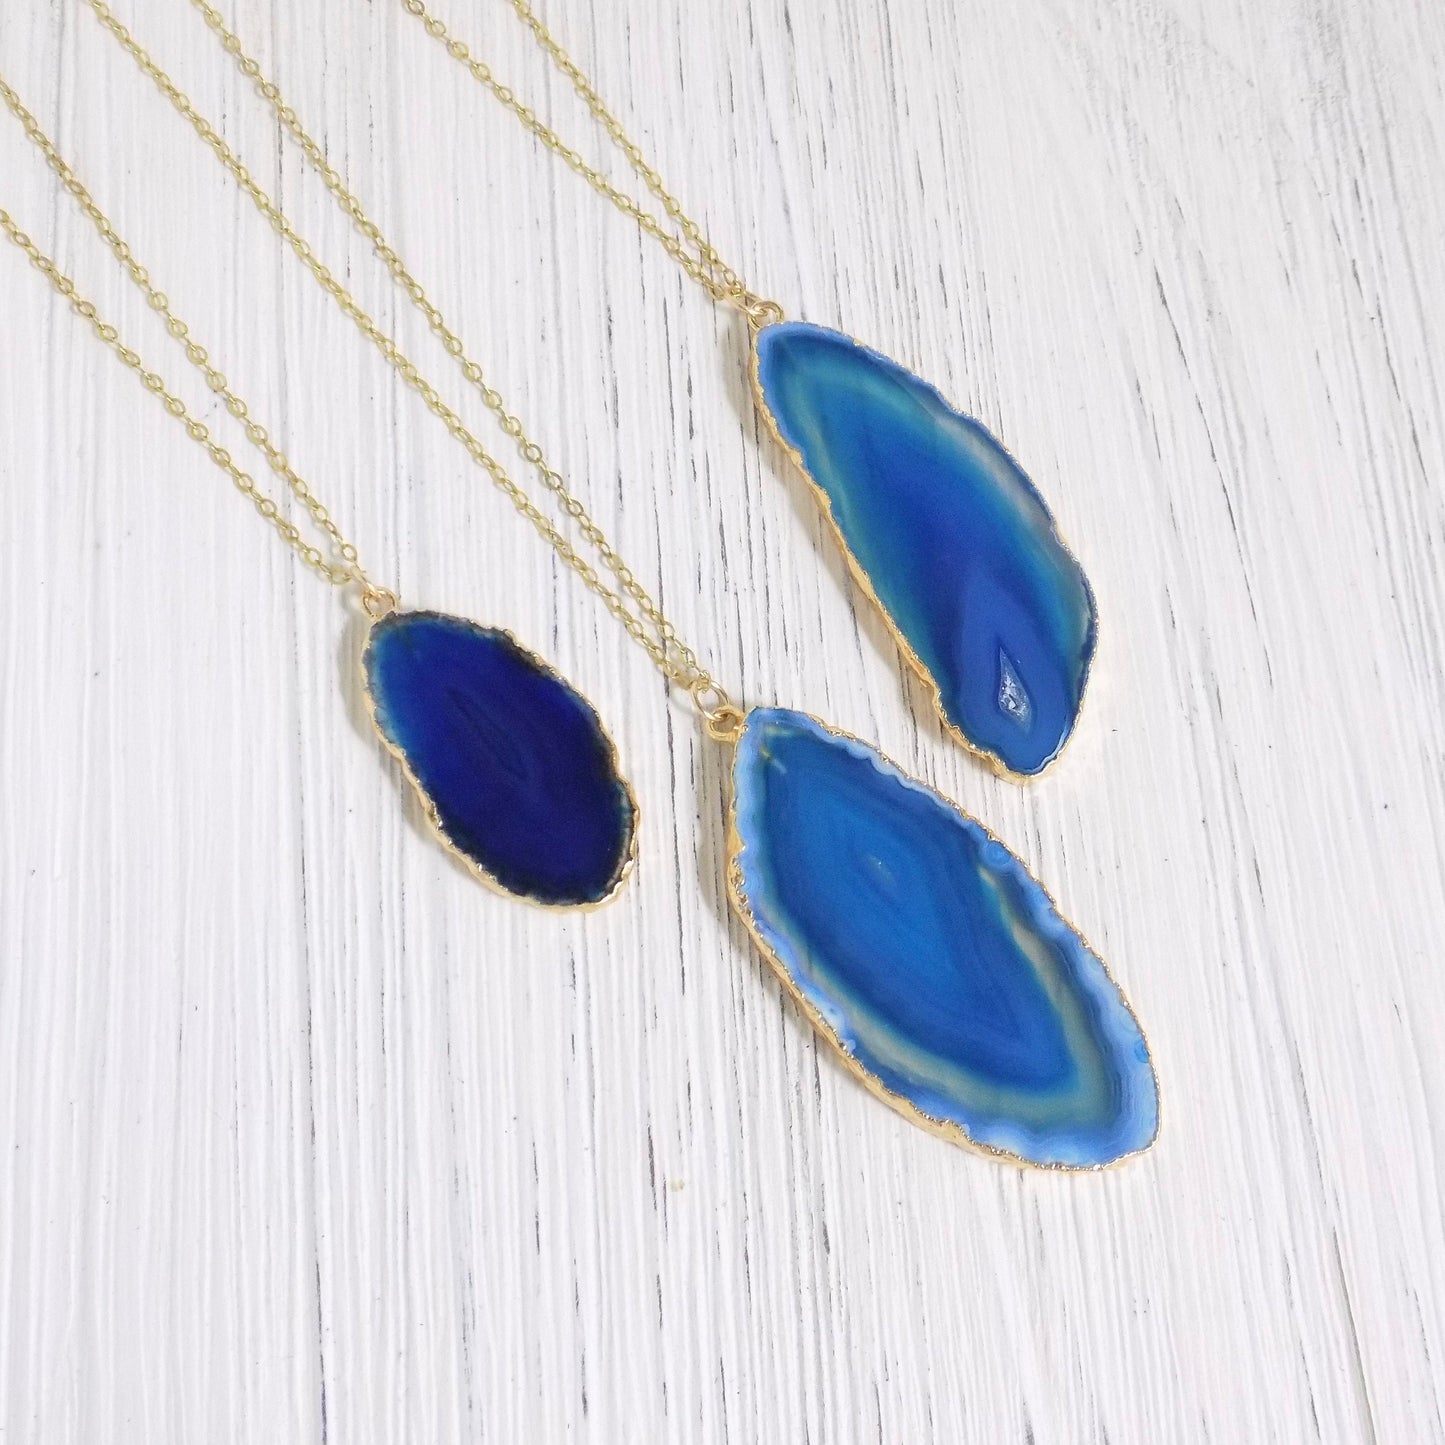 Blue Agate Necklace, Small Geode Necklace, Raw Stone, 14K Gold Filled Chain Long, Mothers Day Gift Women, G14-146